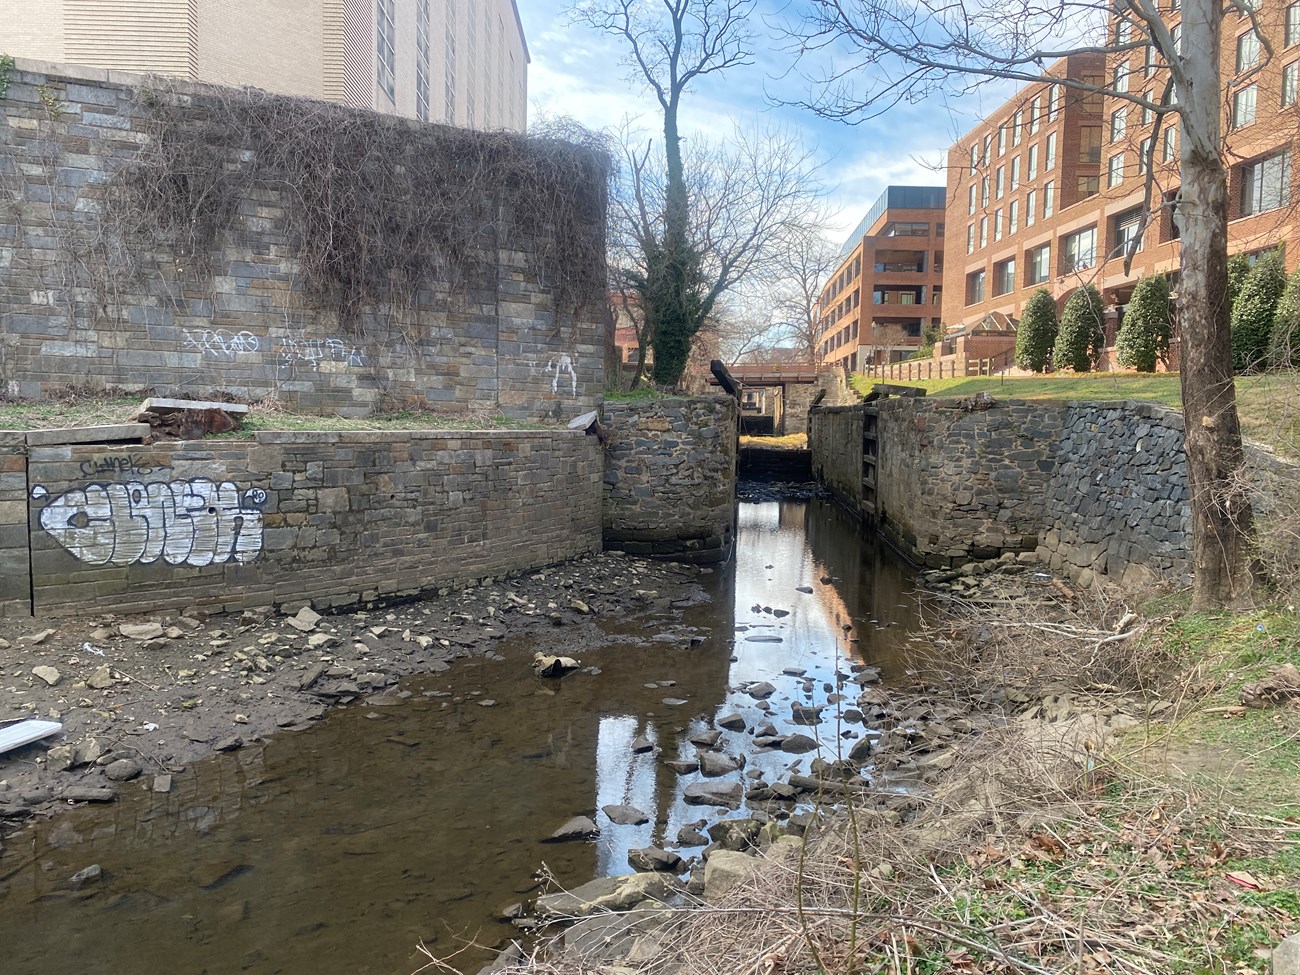 Photo of Lock 1 in Georgetown. There is shallow water in the canal, and masonry walls on either side of the canal.